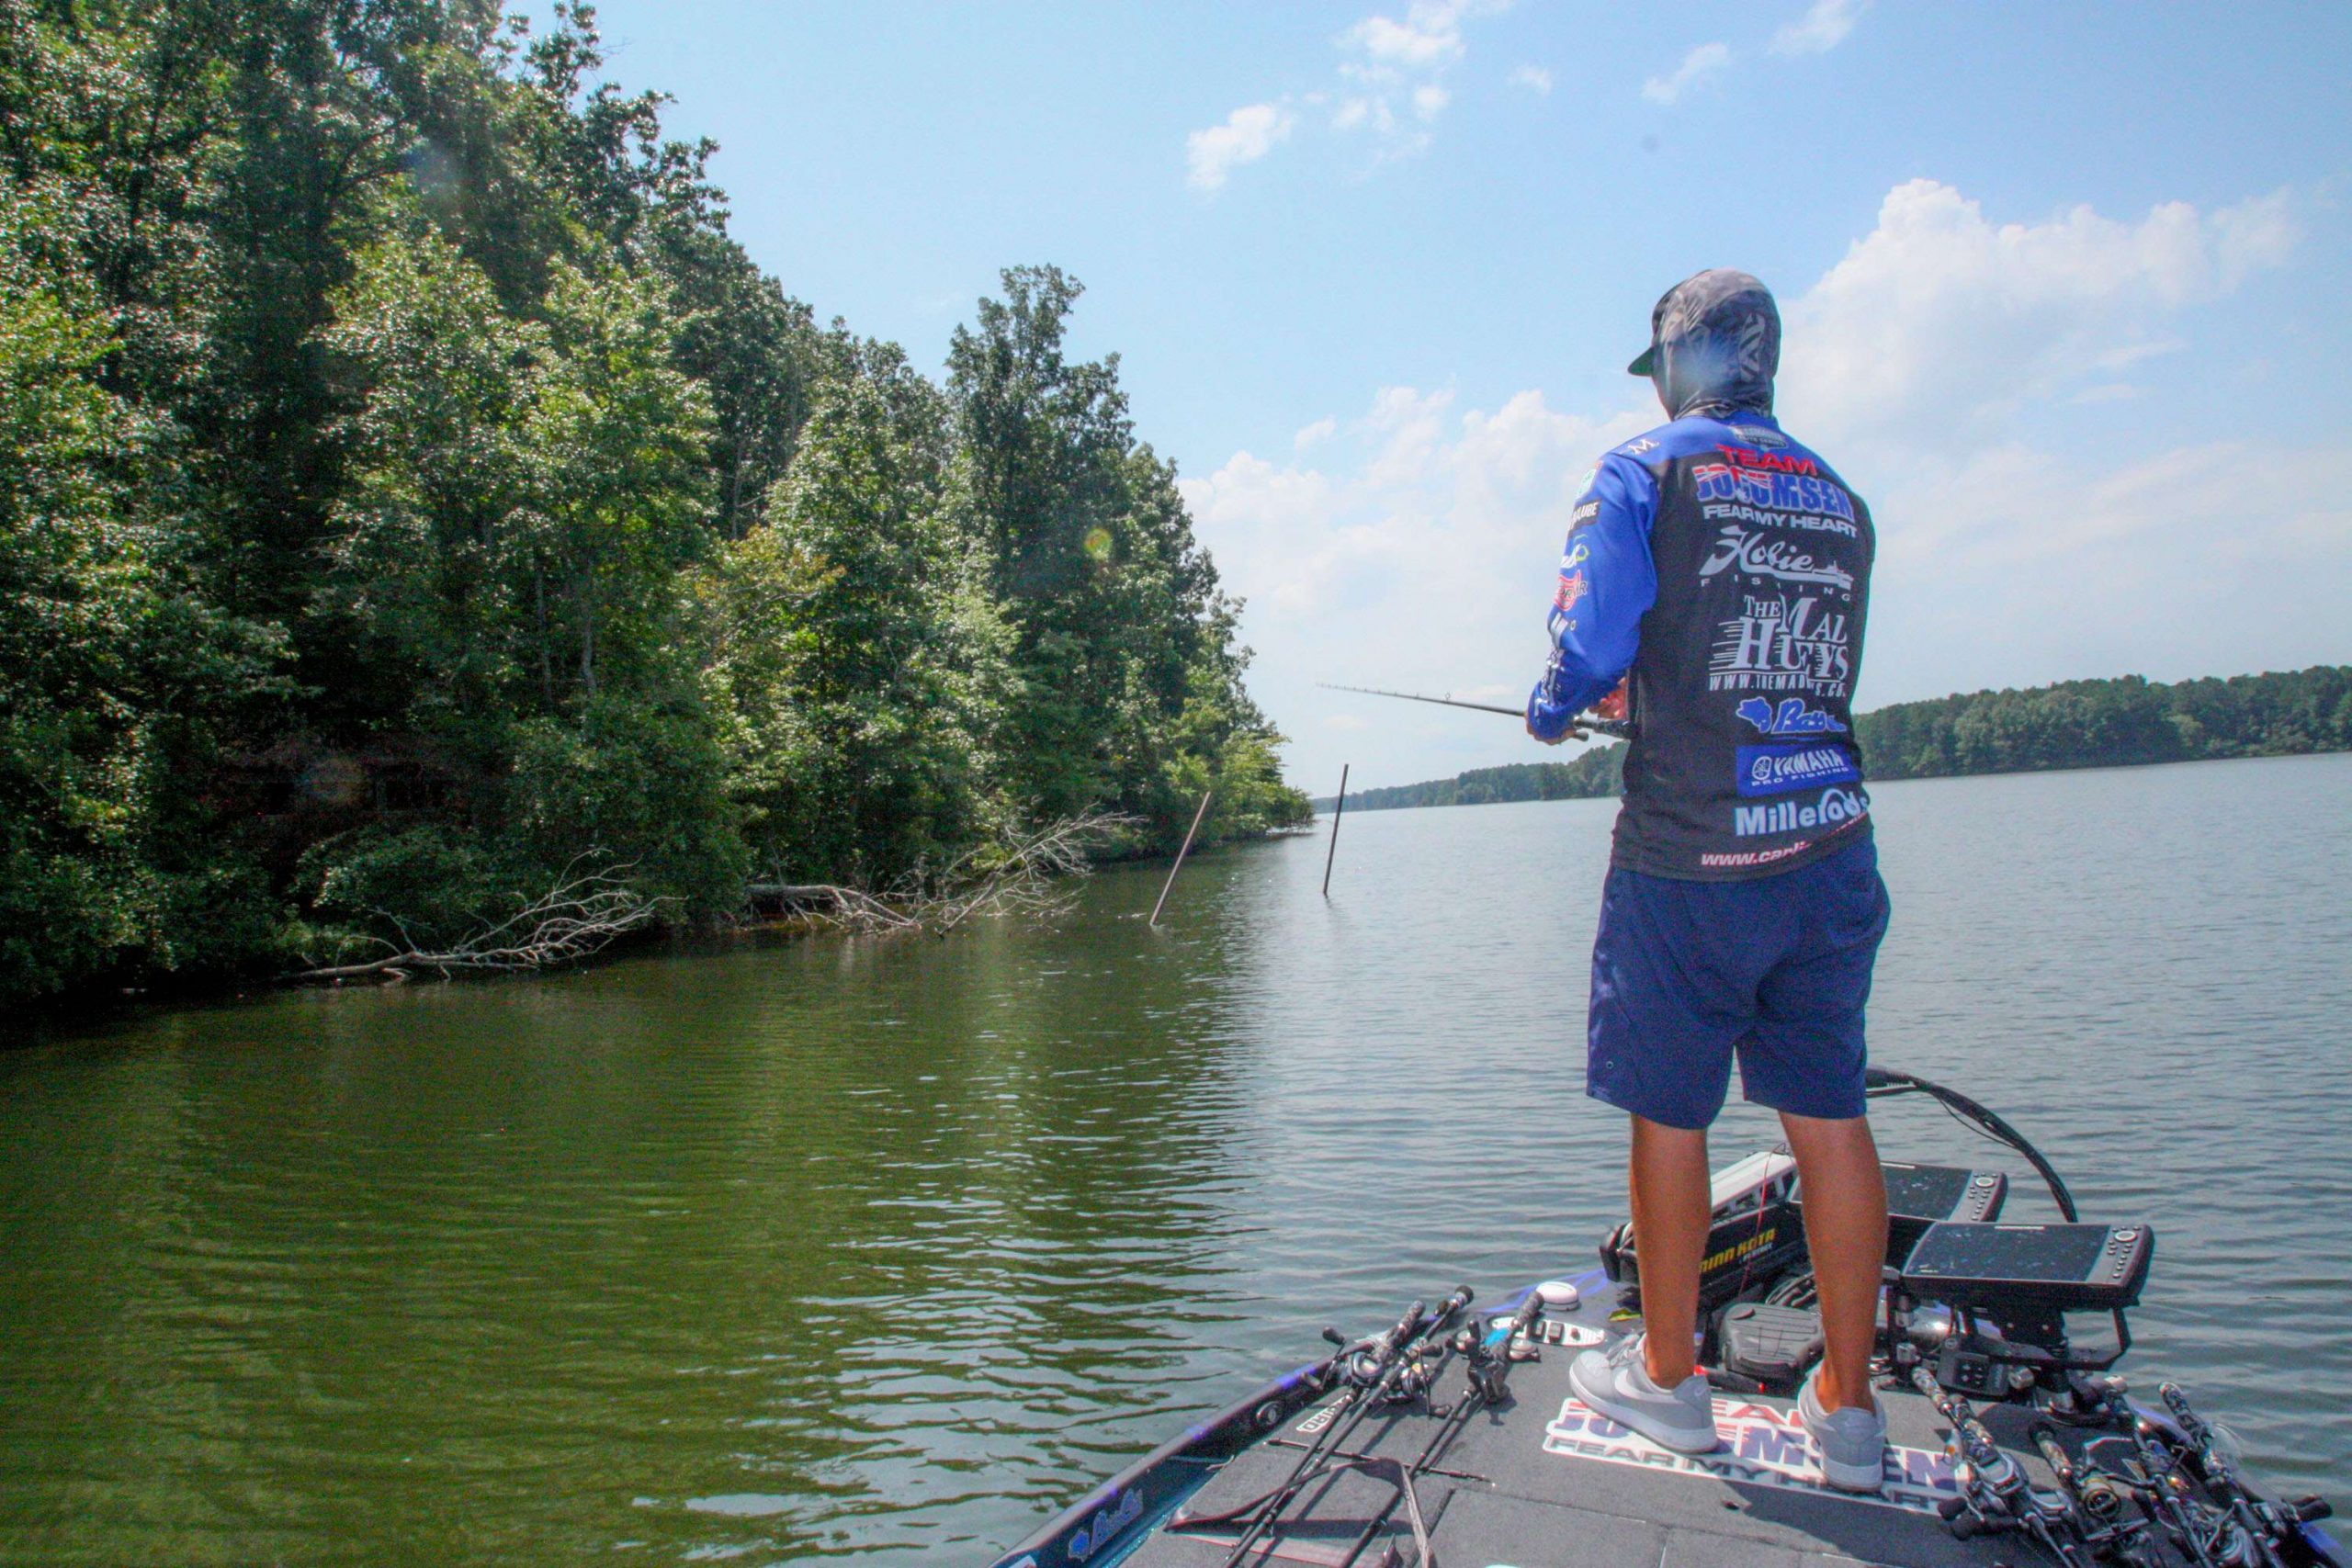 <b>12:13 p.m.</b> Jocumsen rounds the point and begins casting the swim jig to a channel bank with scattered wood cover. âThis spot is totally different than what Iâve been fishing, and thereâs deep water close by.â <br>
<b>12:18 p.m.</b> Jocumsen drags the Roboworm across a sand point and bags a 10-inch bass. <br>
<b>12:24 p.m.</b> The Aussie pro zips straight across the lake to a pocket choked with pads and hydrilla. Neither the rat nor the bladed jig work here. <br>
<b>12:36 p.m.</b> Jocumsen races to the extreme upper end of Lake L, where he fishes a submerged ditch with the drop-shot worm.
